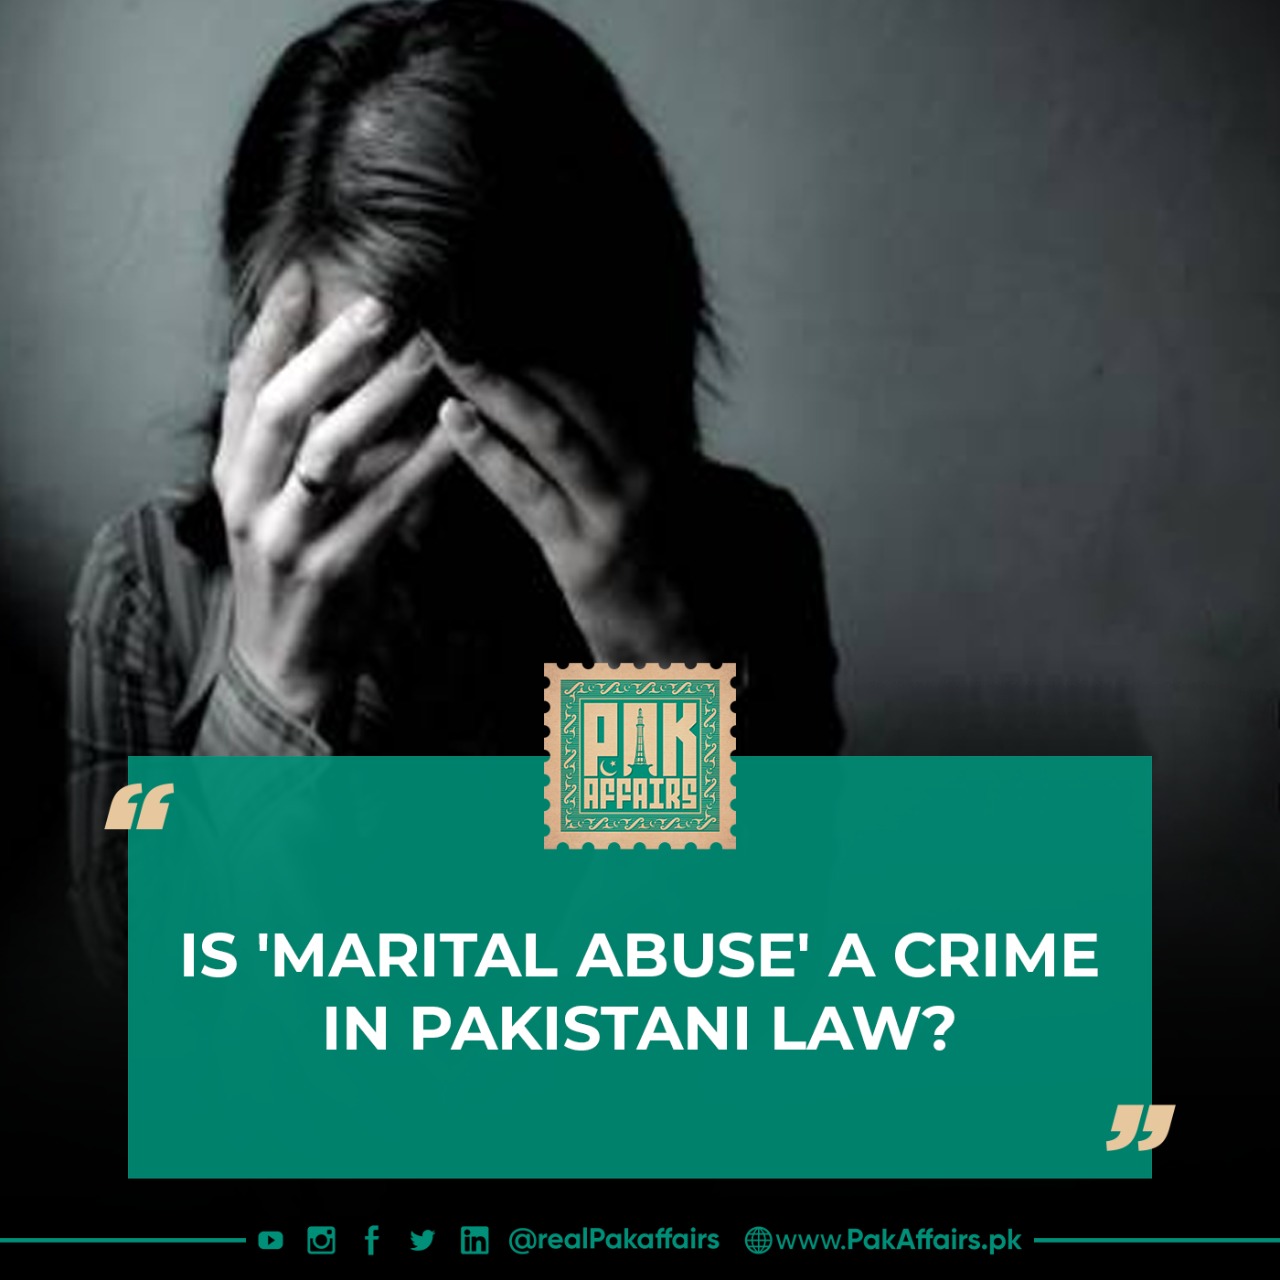 Is 'marital abuse' a crime in Pakistani law?